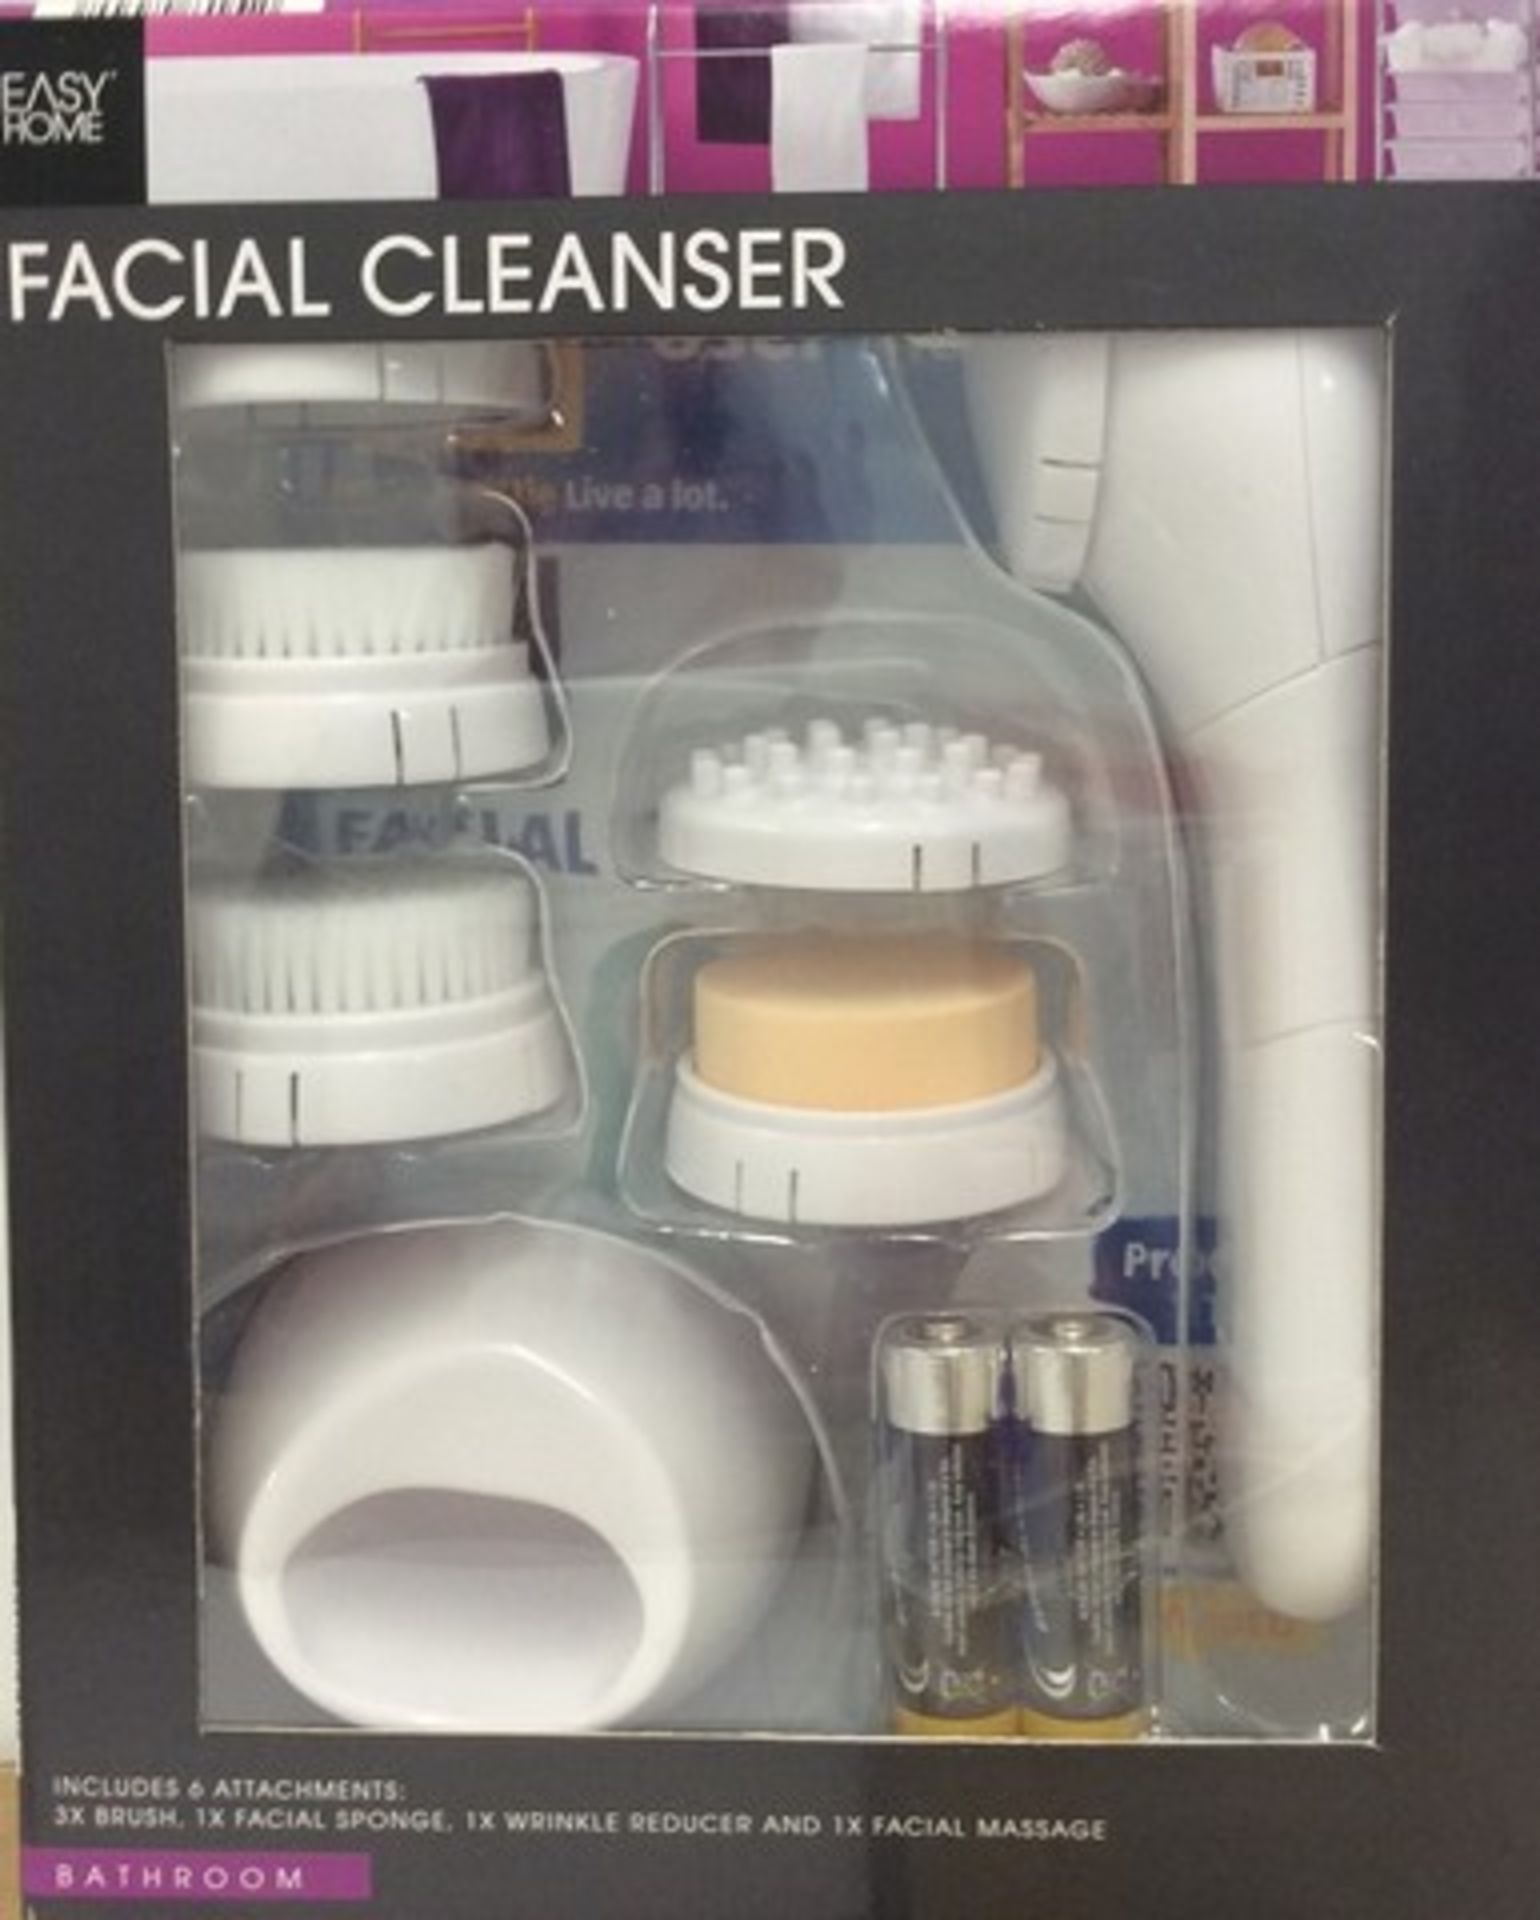 V Brand New Easy Home Facial Cleanser Includes 6 Attachments-3 Brushes-1 Facial Sponge-1 Wrinkle - Image 2 of 2